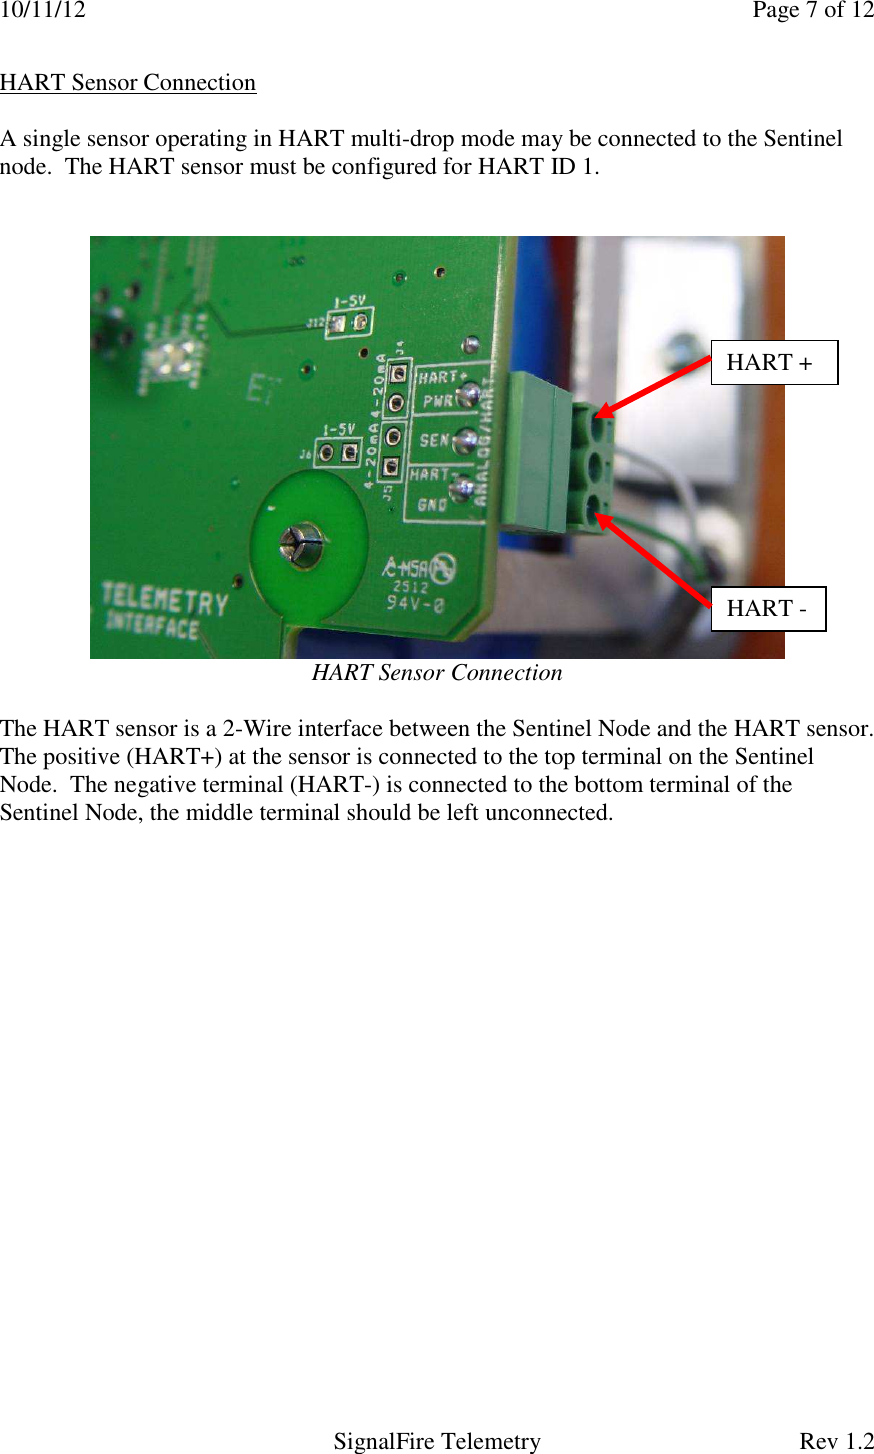 10/11/12    Page 7 of 12   SignalFire Telemetry  Rev 1.2 HART Sensor Connection  A single sensor operating in HART multi-drop mode may be connected to the Sentinel node.  The HART sensor must be configured for HART ID 1.      HART Sensor Connection  The HART sensor is a 2-Wire interface between the Sentinel Node and the HART sensor.  The positive (HART+) at the sensor is connected to the top terminal on the Sentinel Node.  The negative terminal (HART-) is connected to the bottom terminal of the Sentinel Node, the middle terminal should be left unconnected.   HART + HART - 